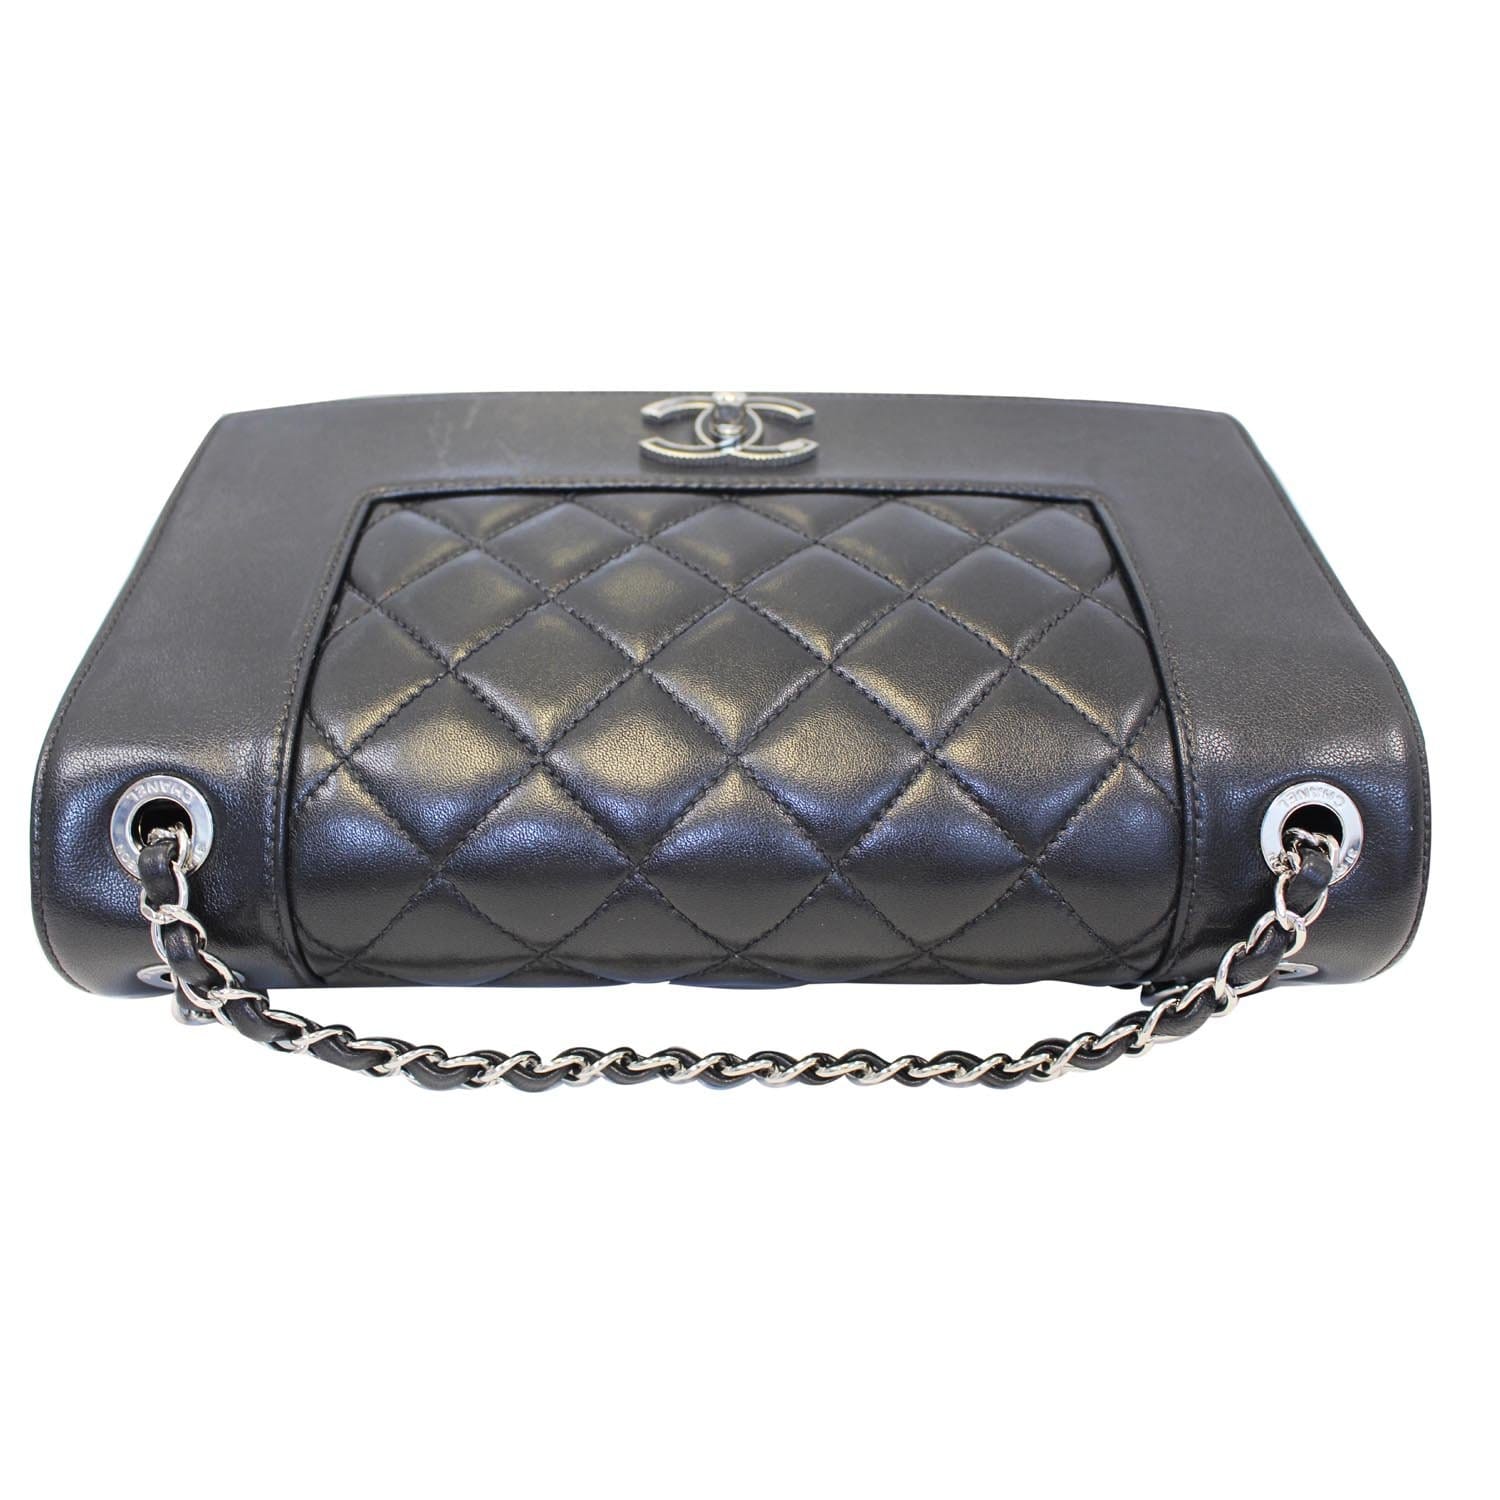 Chanel Black Quilted Lambskin Classic Maxi Single Flap Bag at Jill's  Consignment